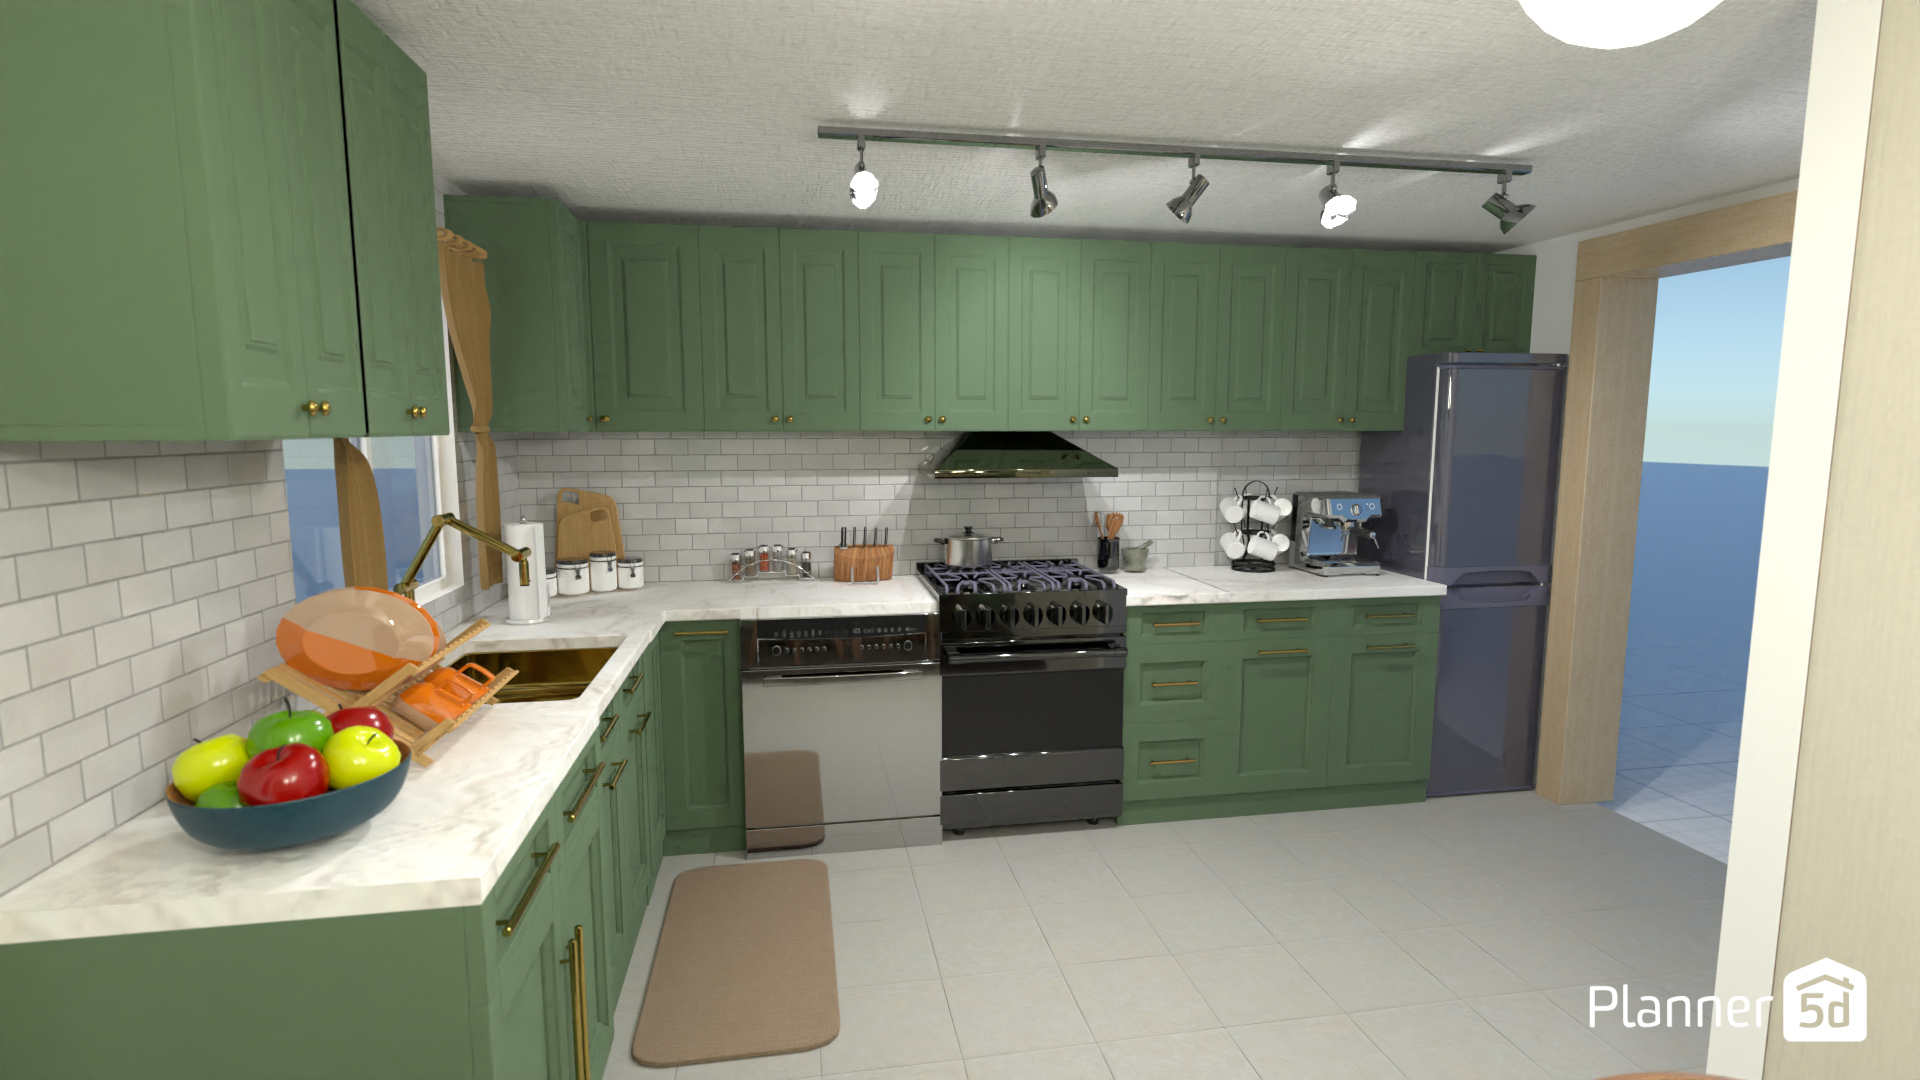 Kitchen 18706816 by User 96426971 image